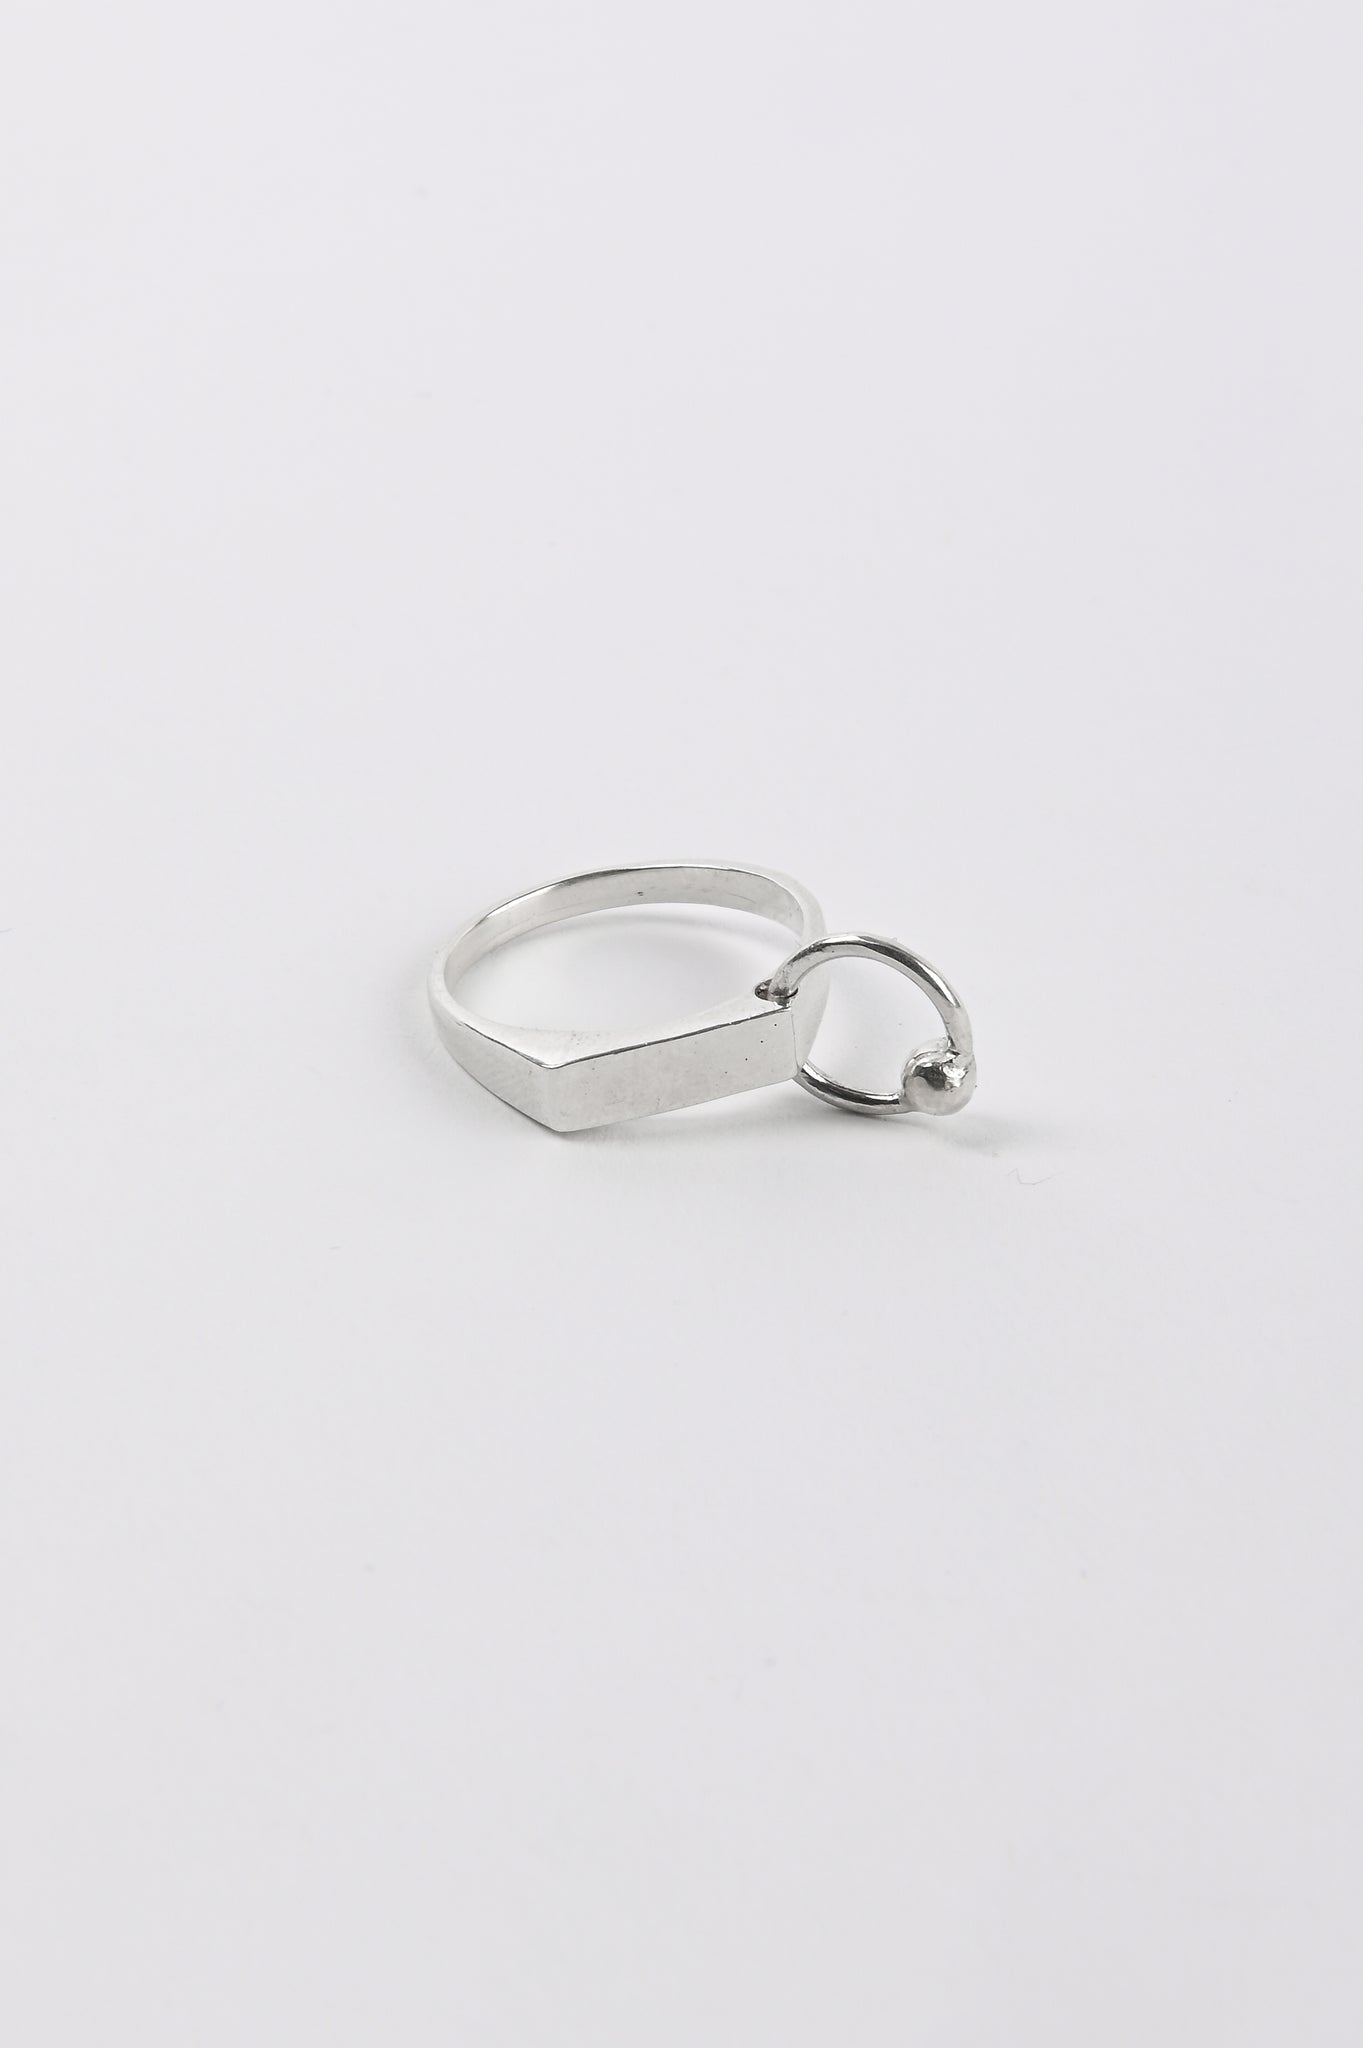 Kick In The Eye 'Zero' Ring With Round Piercing